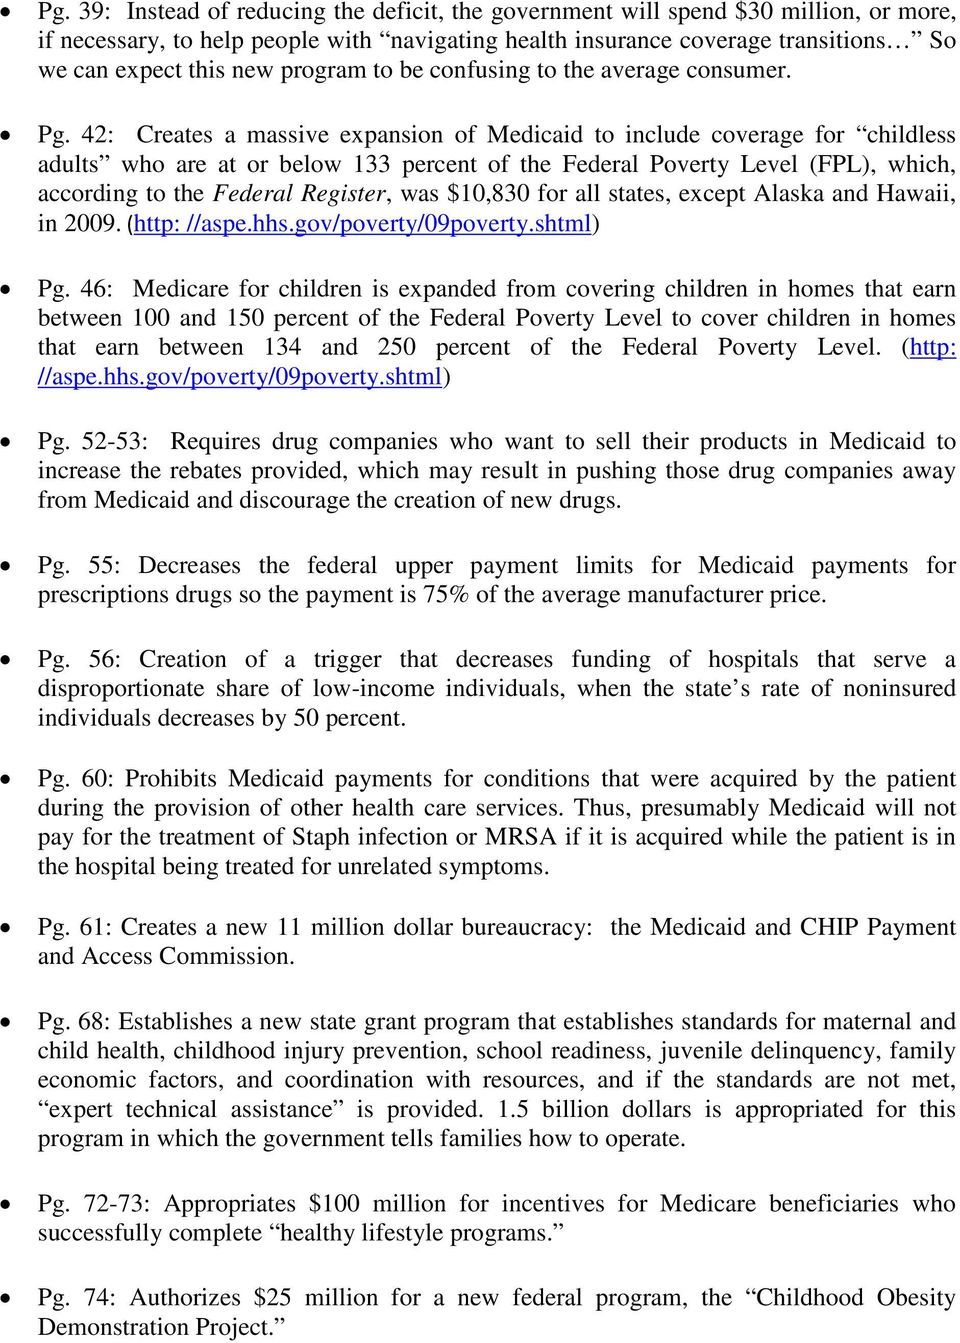 42: Creates a massive expansion of Medicaid to include coverage for childless adults who are at or below 133 percent of the Federal Poverty Level (FPL), which, according to the Federal Register, was